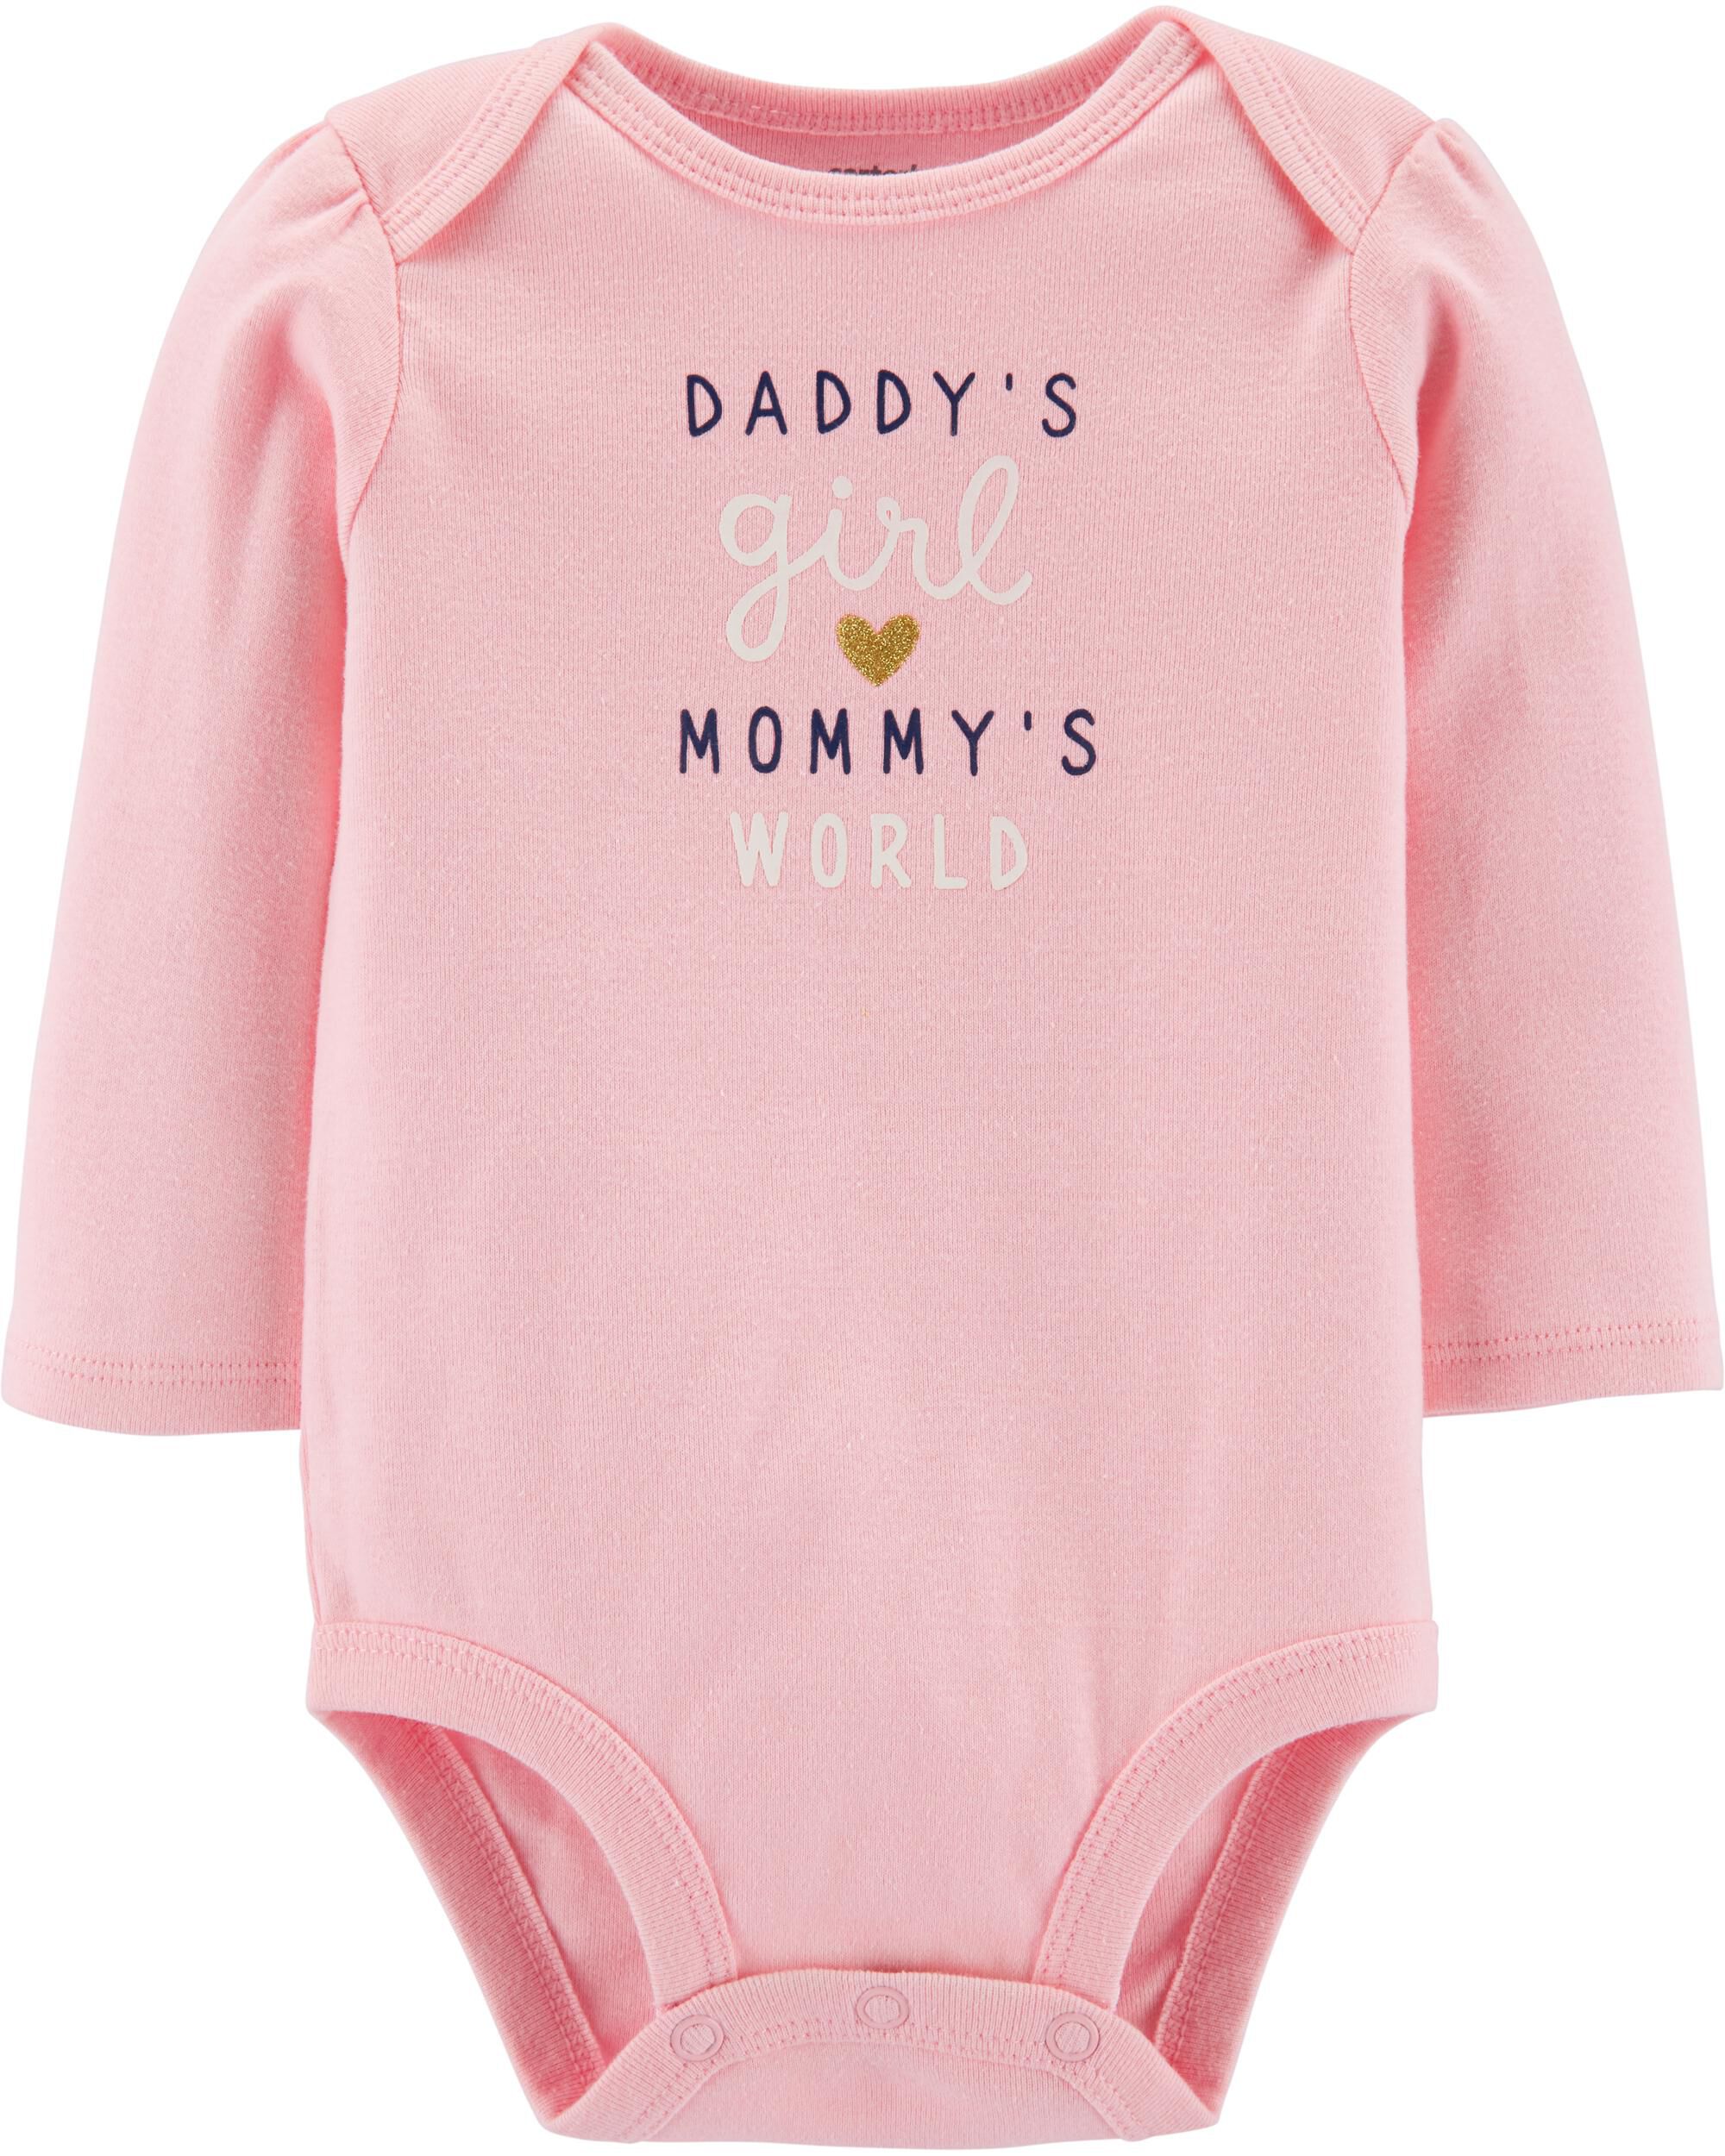 daddys girl mommys world newborn outfit